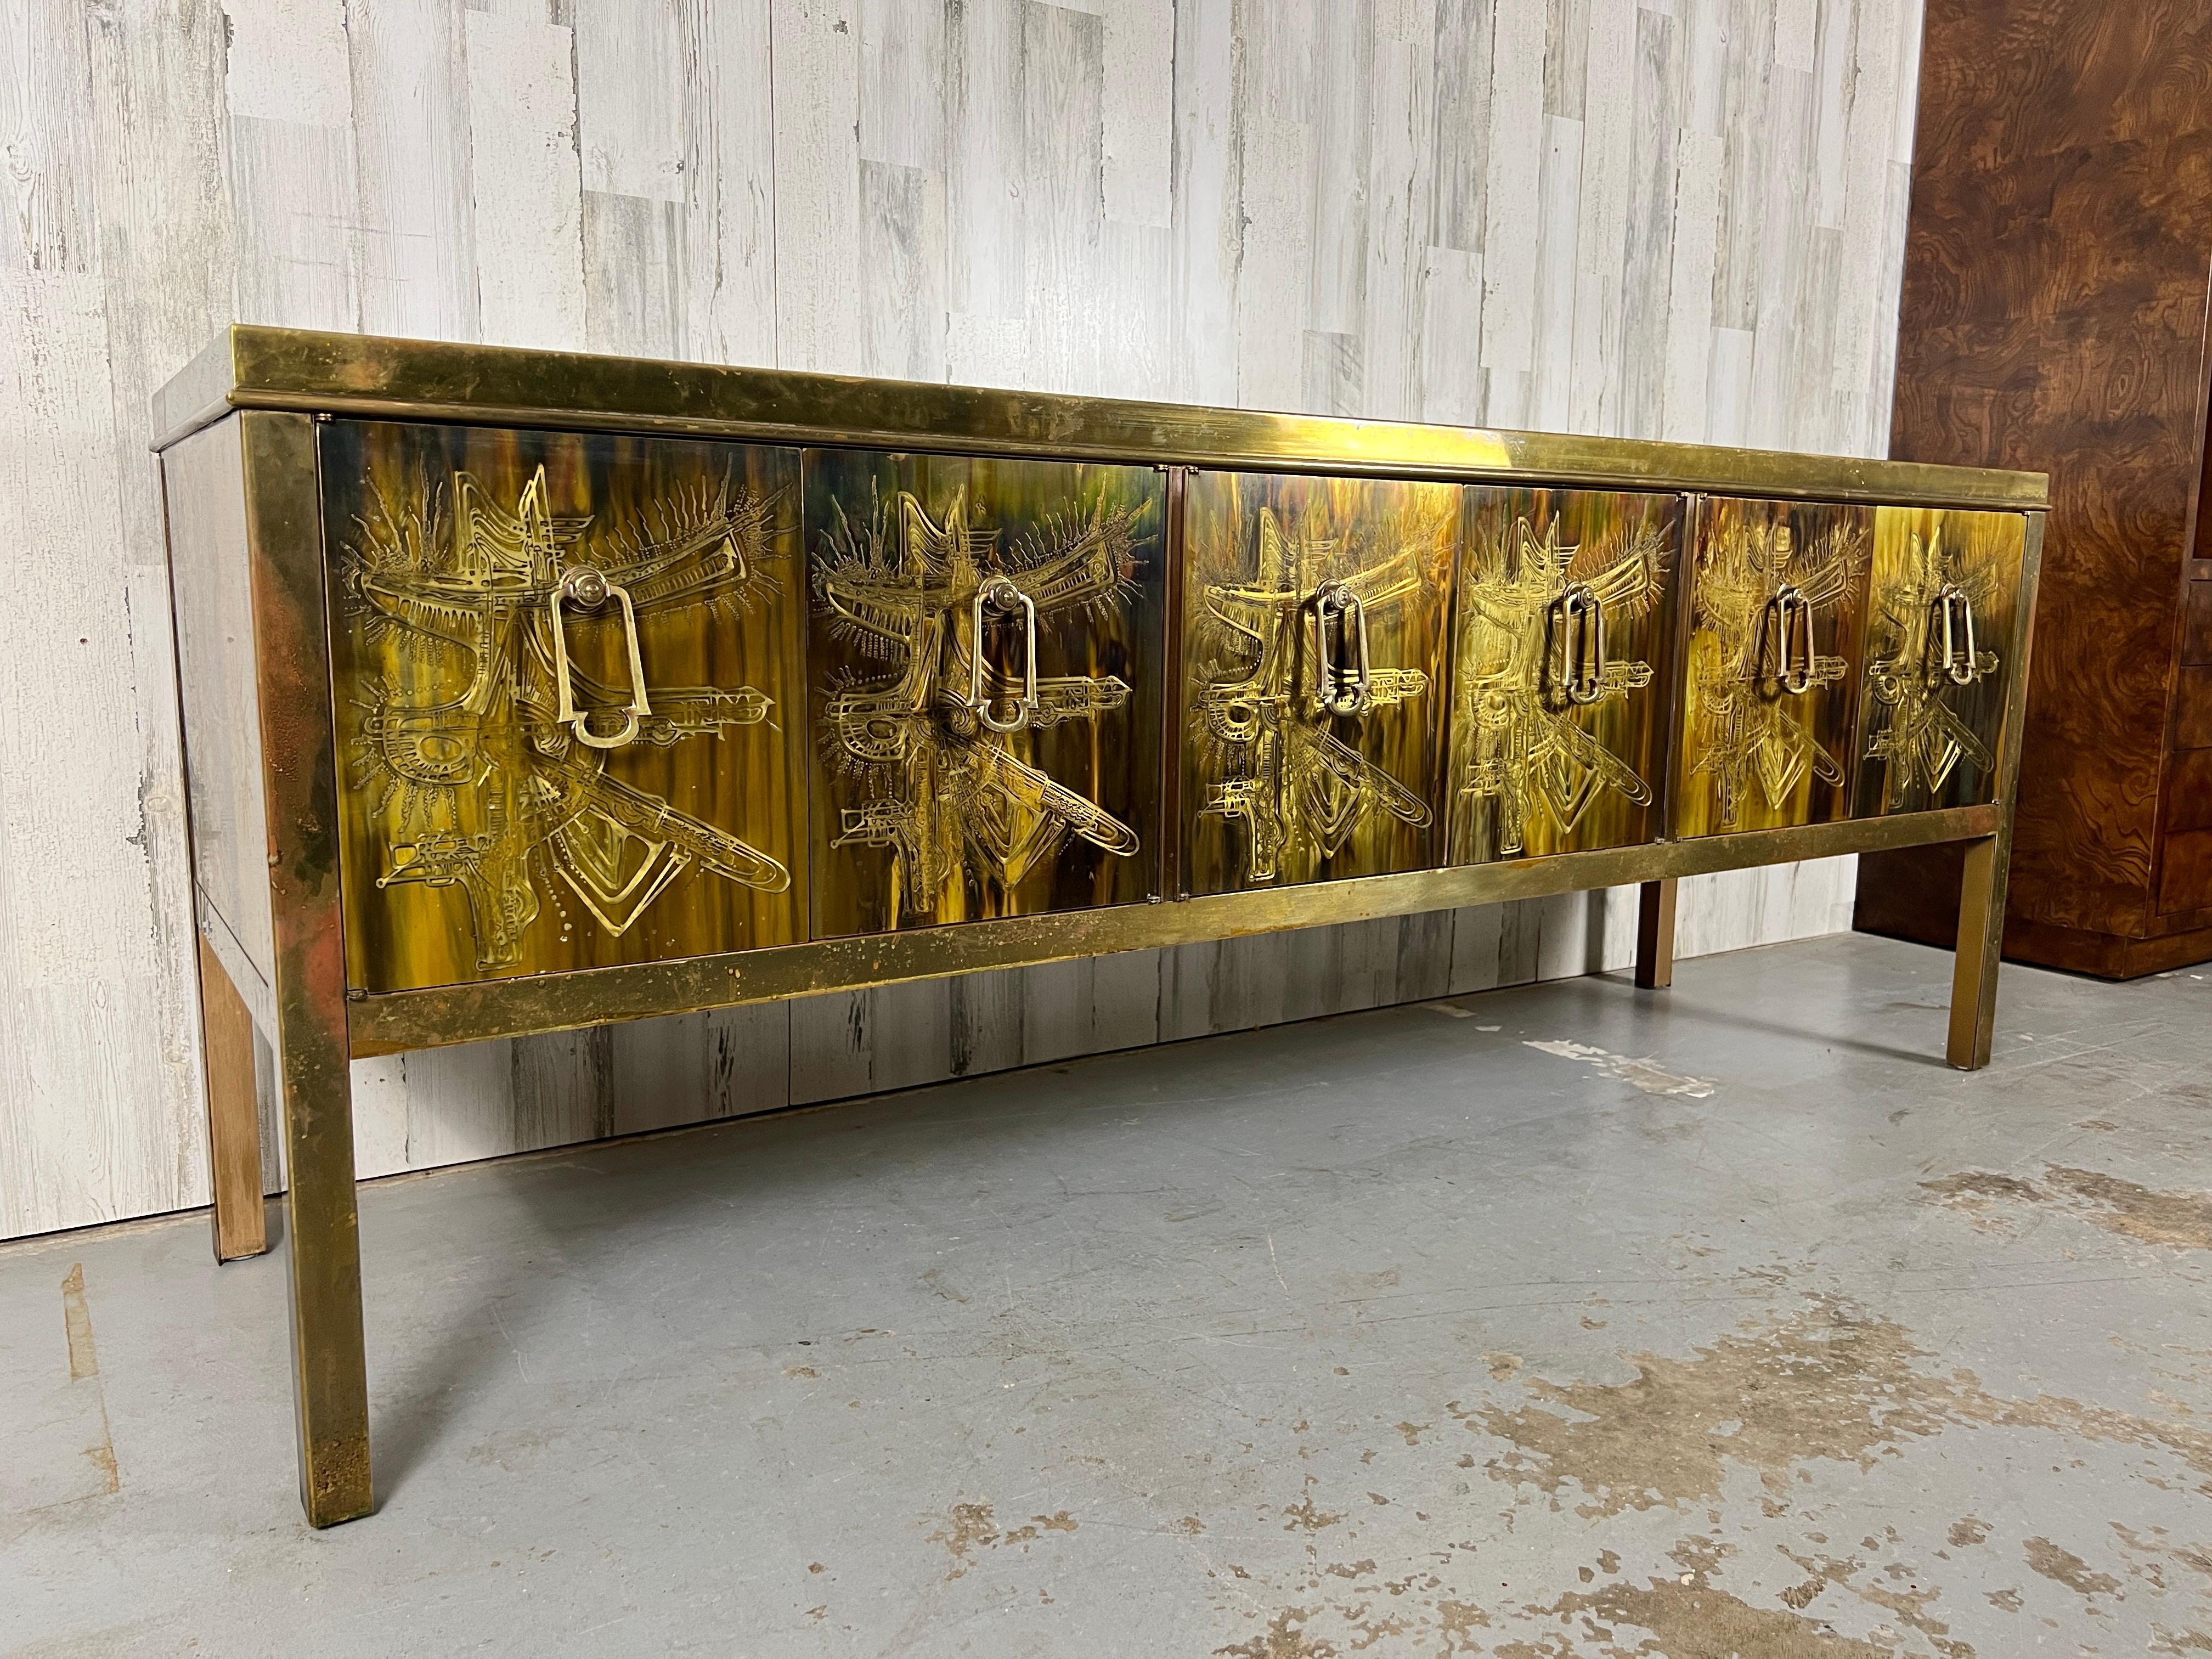 Bernhard Rohne for Mastercraft. six-door acid etched and embossed brass credenza with brass pulls housed in a brass frame with a nice patina . Designed by Bernhard Rohne for Mastercraft.